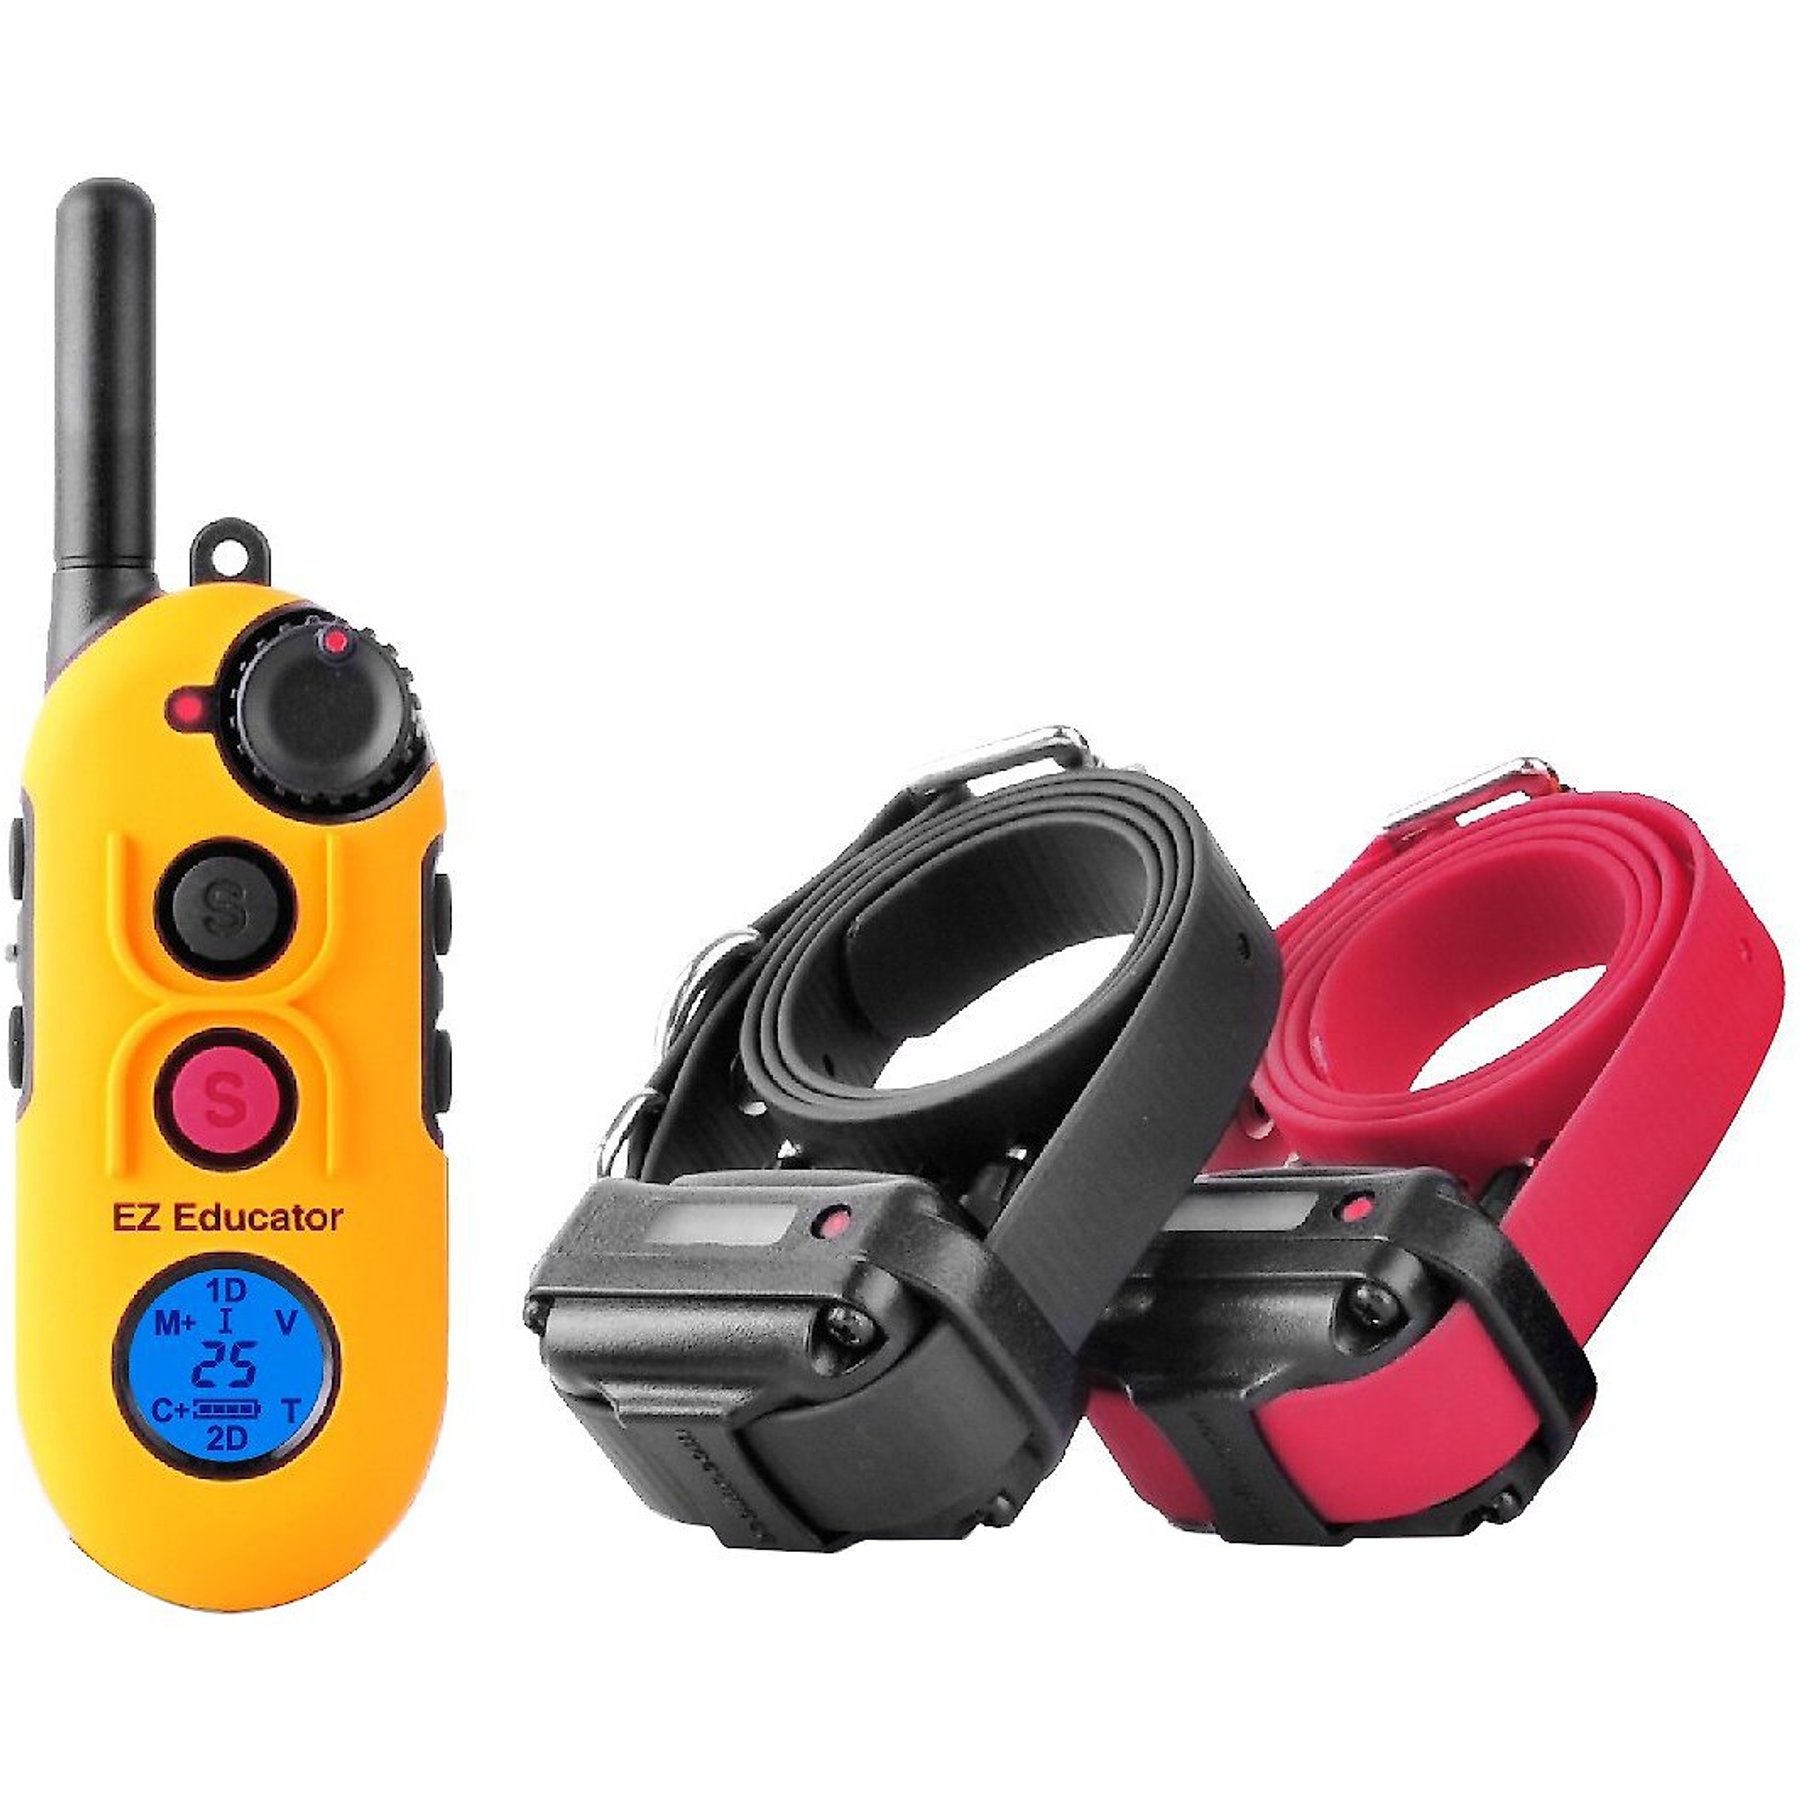 CUE Add on Yellow Ecollar with Safety Level Lock Boost Vibration Waterproof  Rechargeable for Small Medium Large Dogs Dog Training Collar by Dogtra 